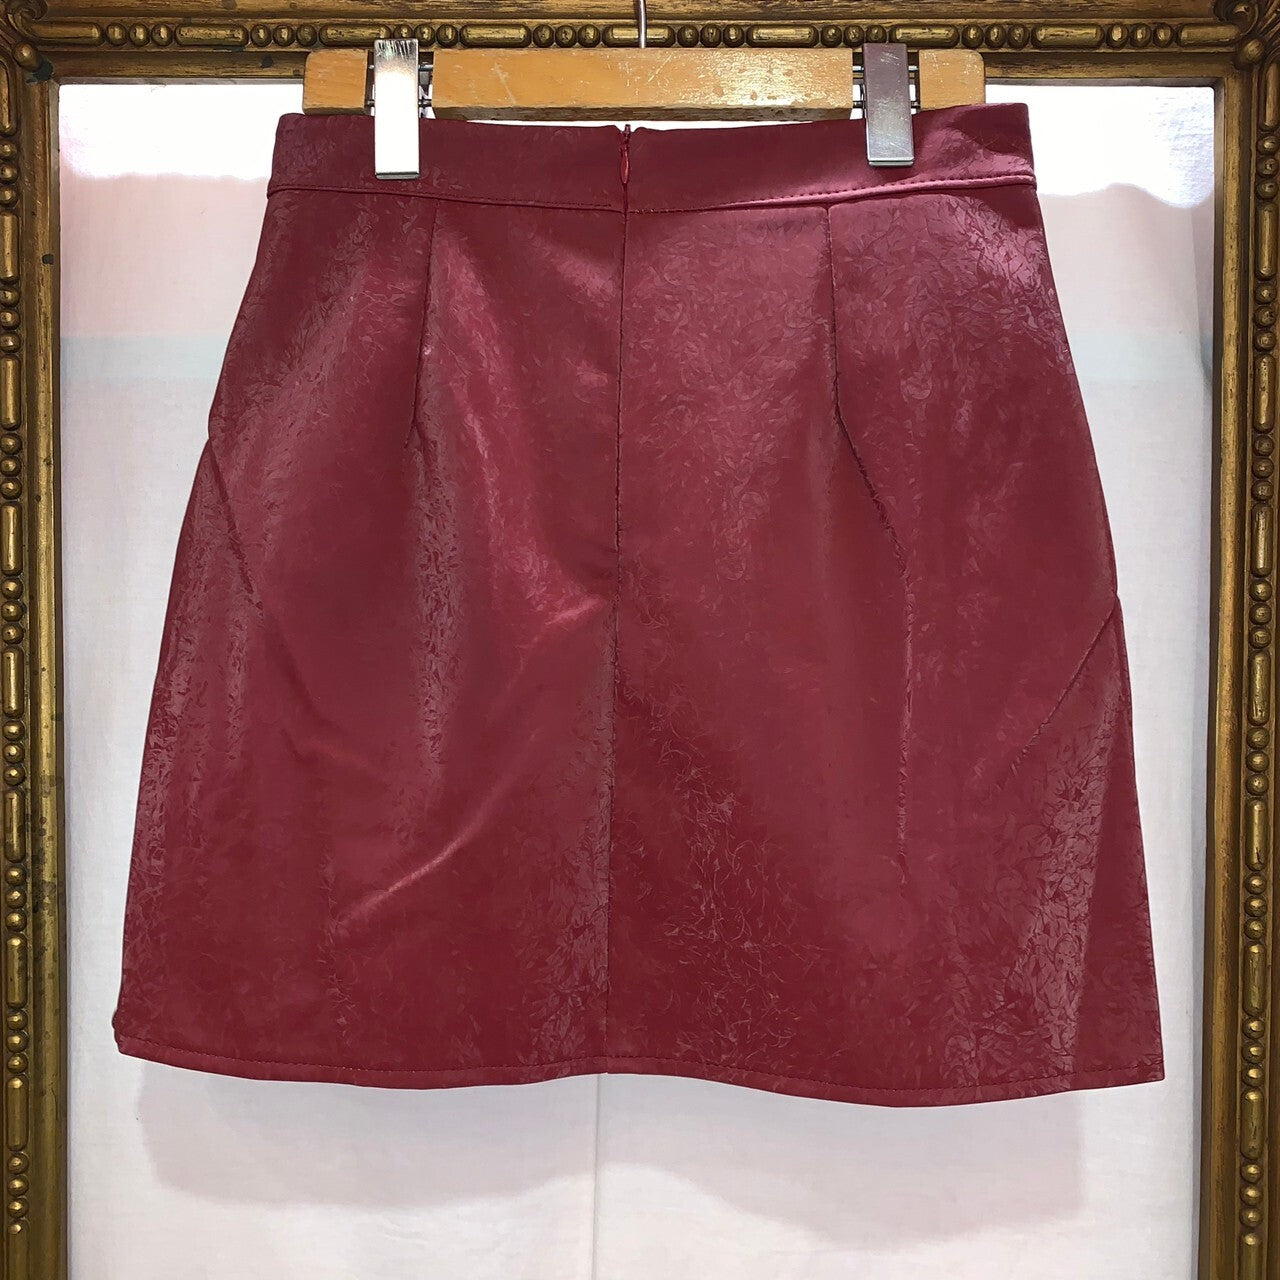 Synthetic Leather China Mini Skirt RED